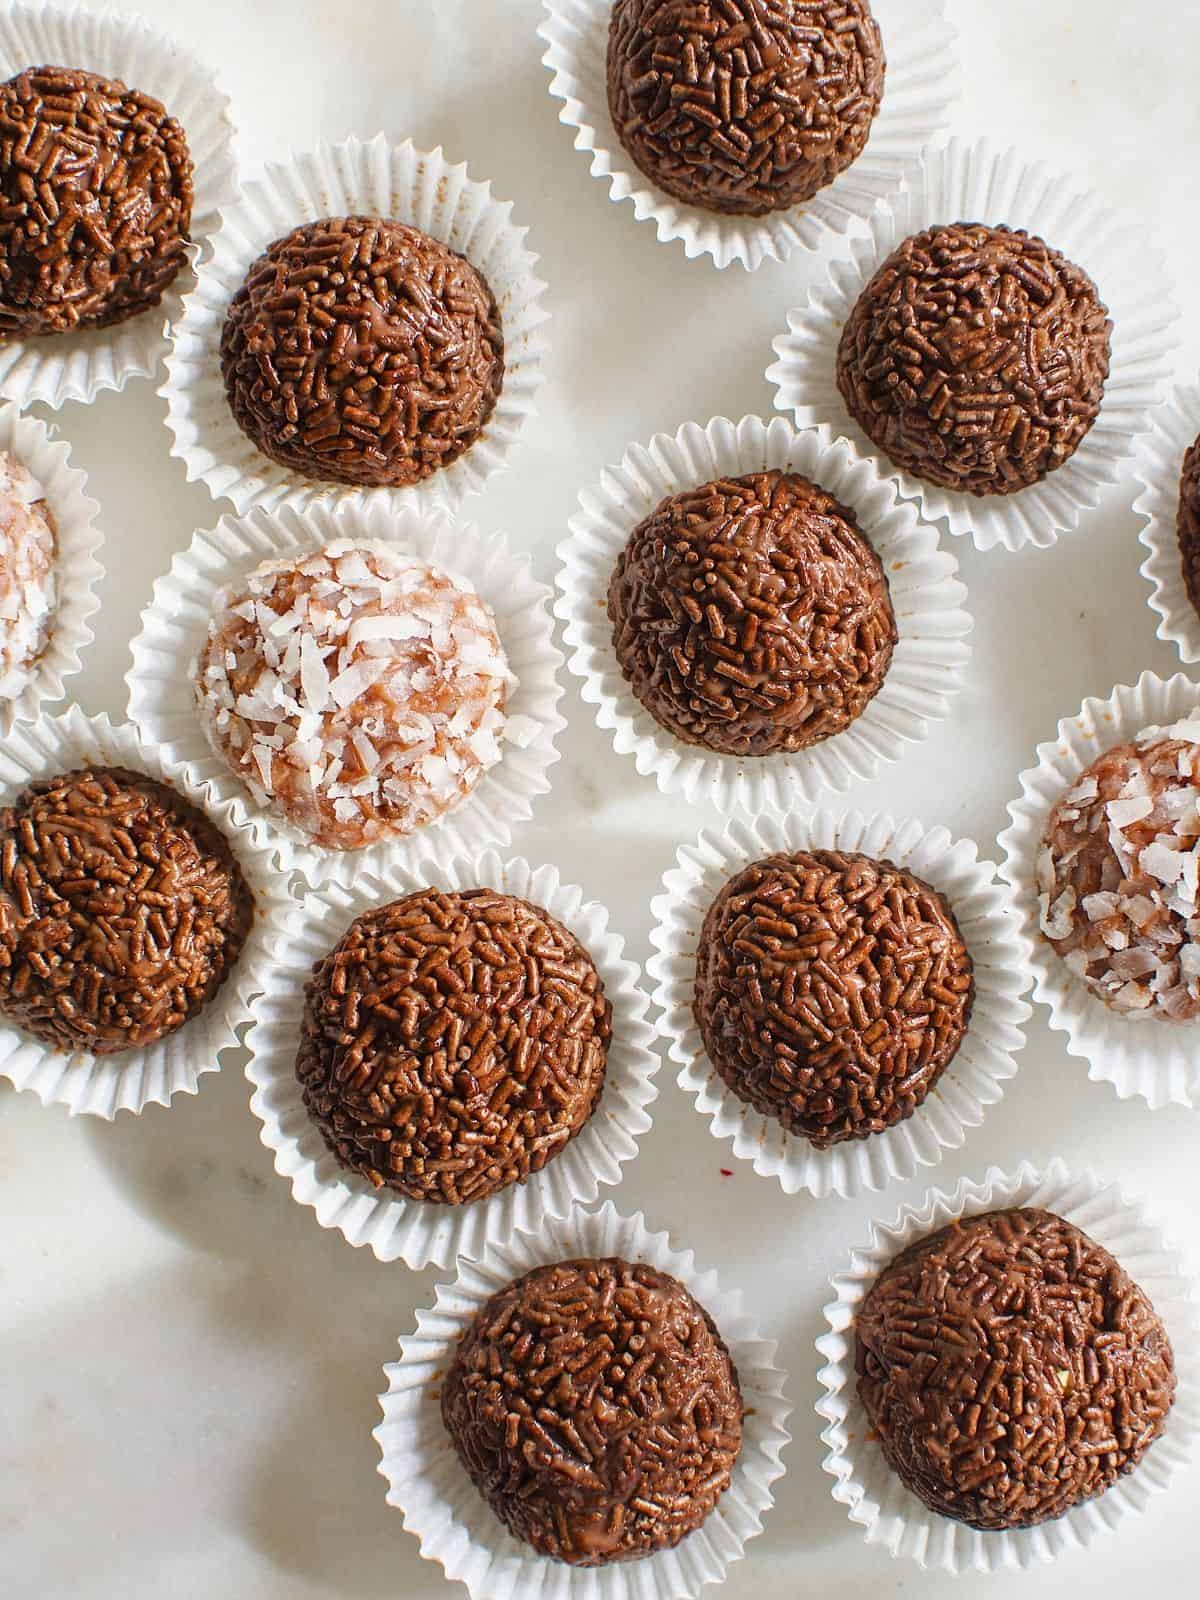 brigadeiro balls, coated with chocolate sprinkles and coconut flakes, in a mini cupcake liners.